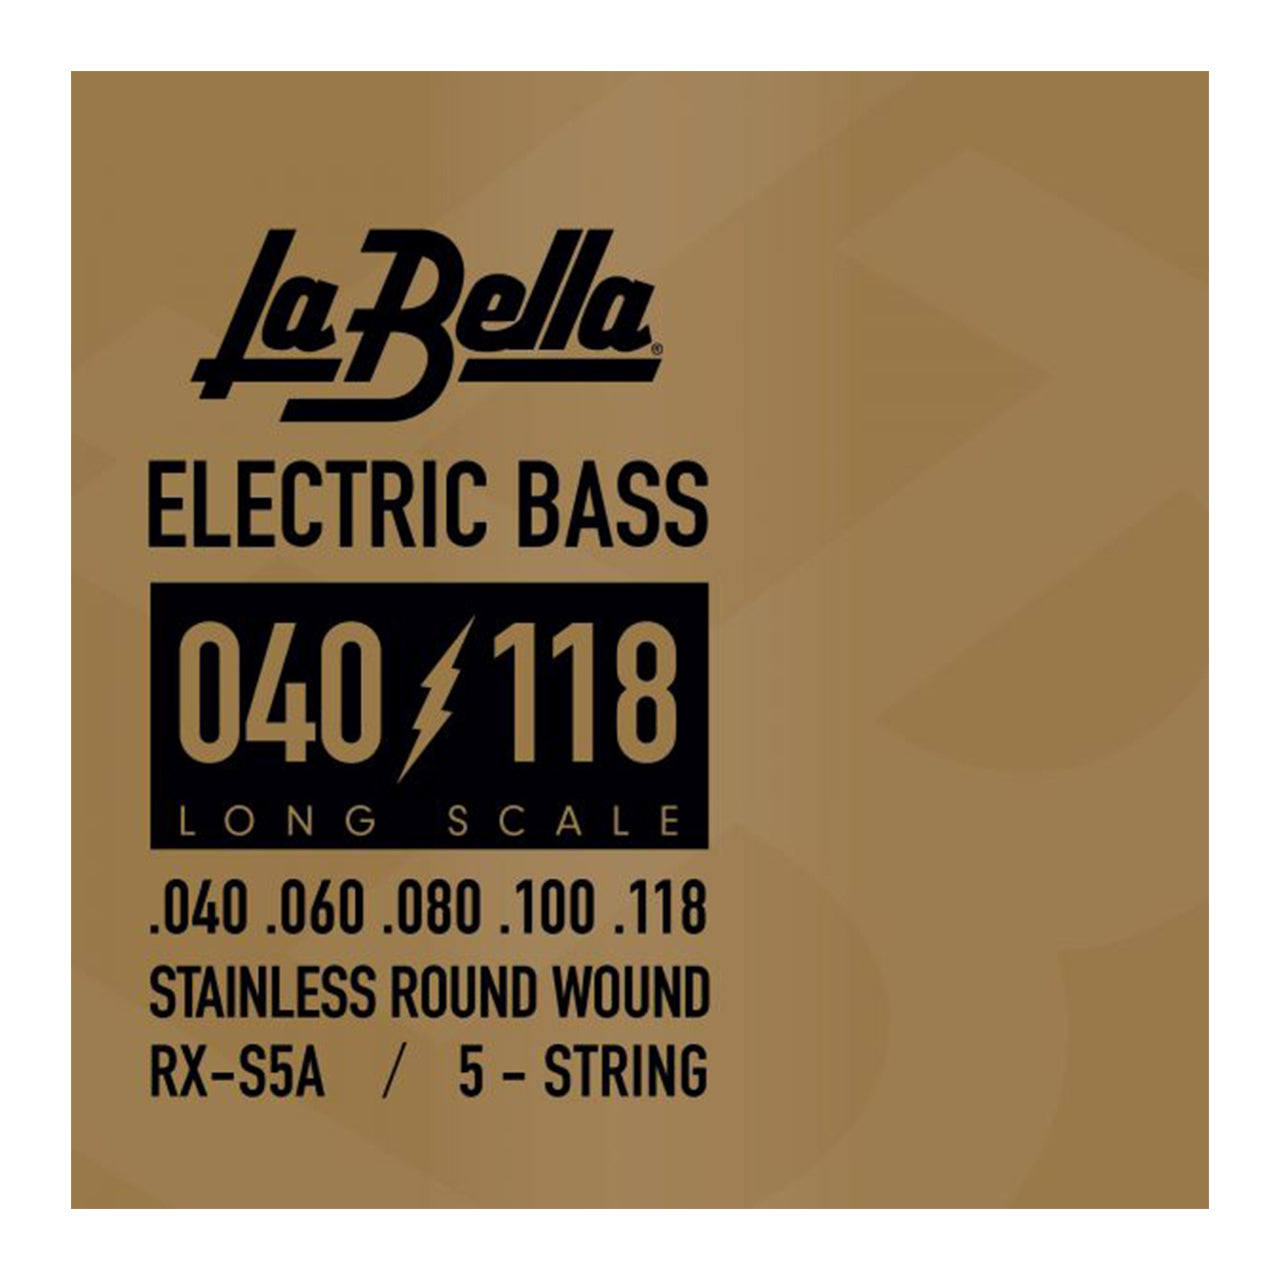 La Bella RX-S5A RX Stainless Round Wound 5-String Electric Bass Strings, 40-118